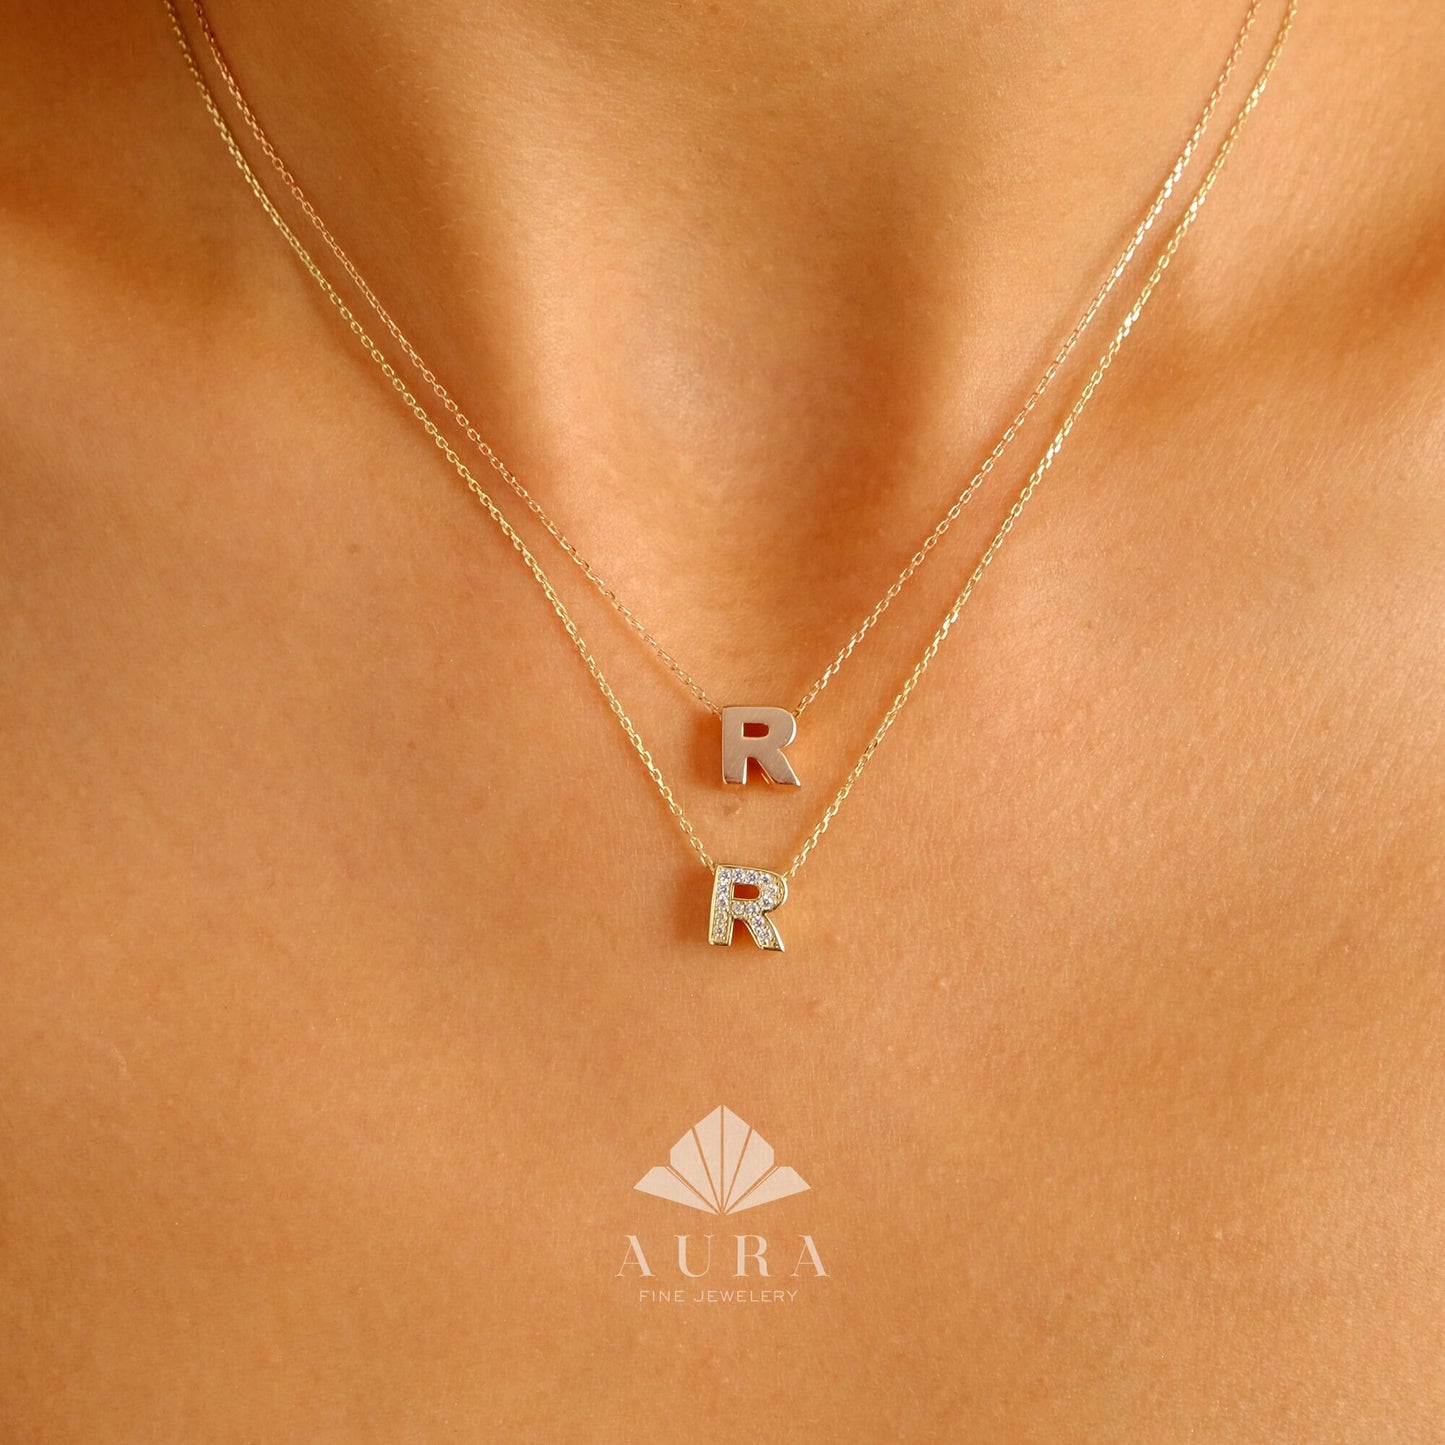 14K Gold Initial Necklace, Cz Diamond Letter Pendant, Custom Initial Necklace, Letter Name Choker, Personalized Necklace, Gift For Her